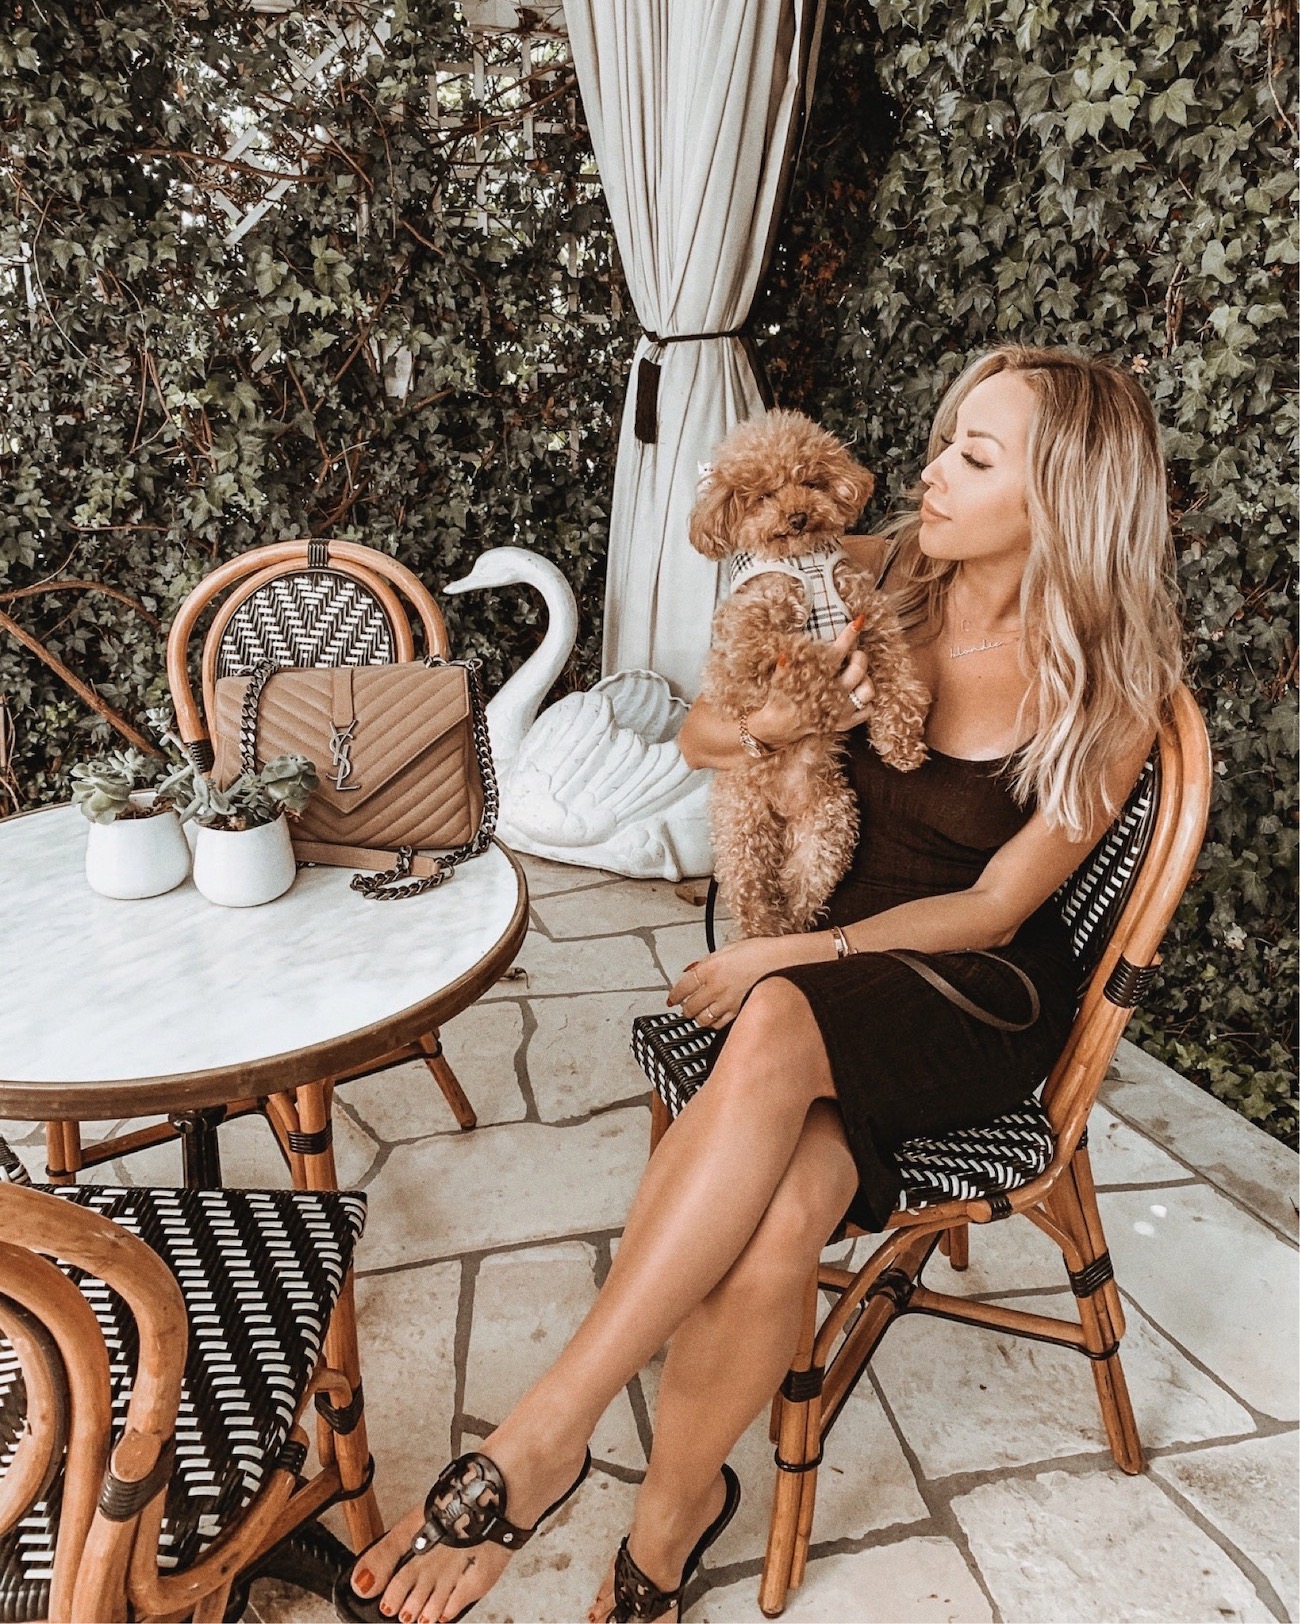 Red Maltipoo | Meela The Maltipoo | Cute Dogs | Blondie in the City by Hayley Larue